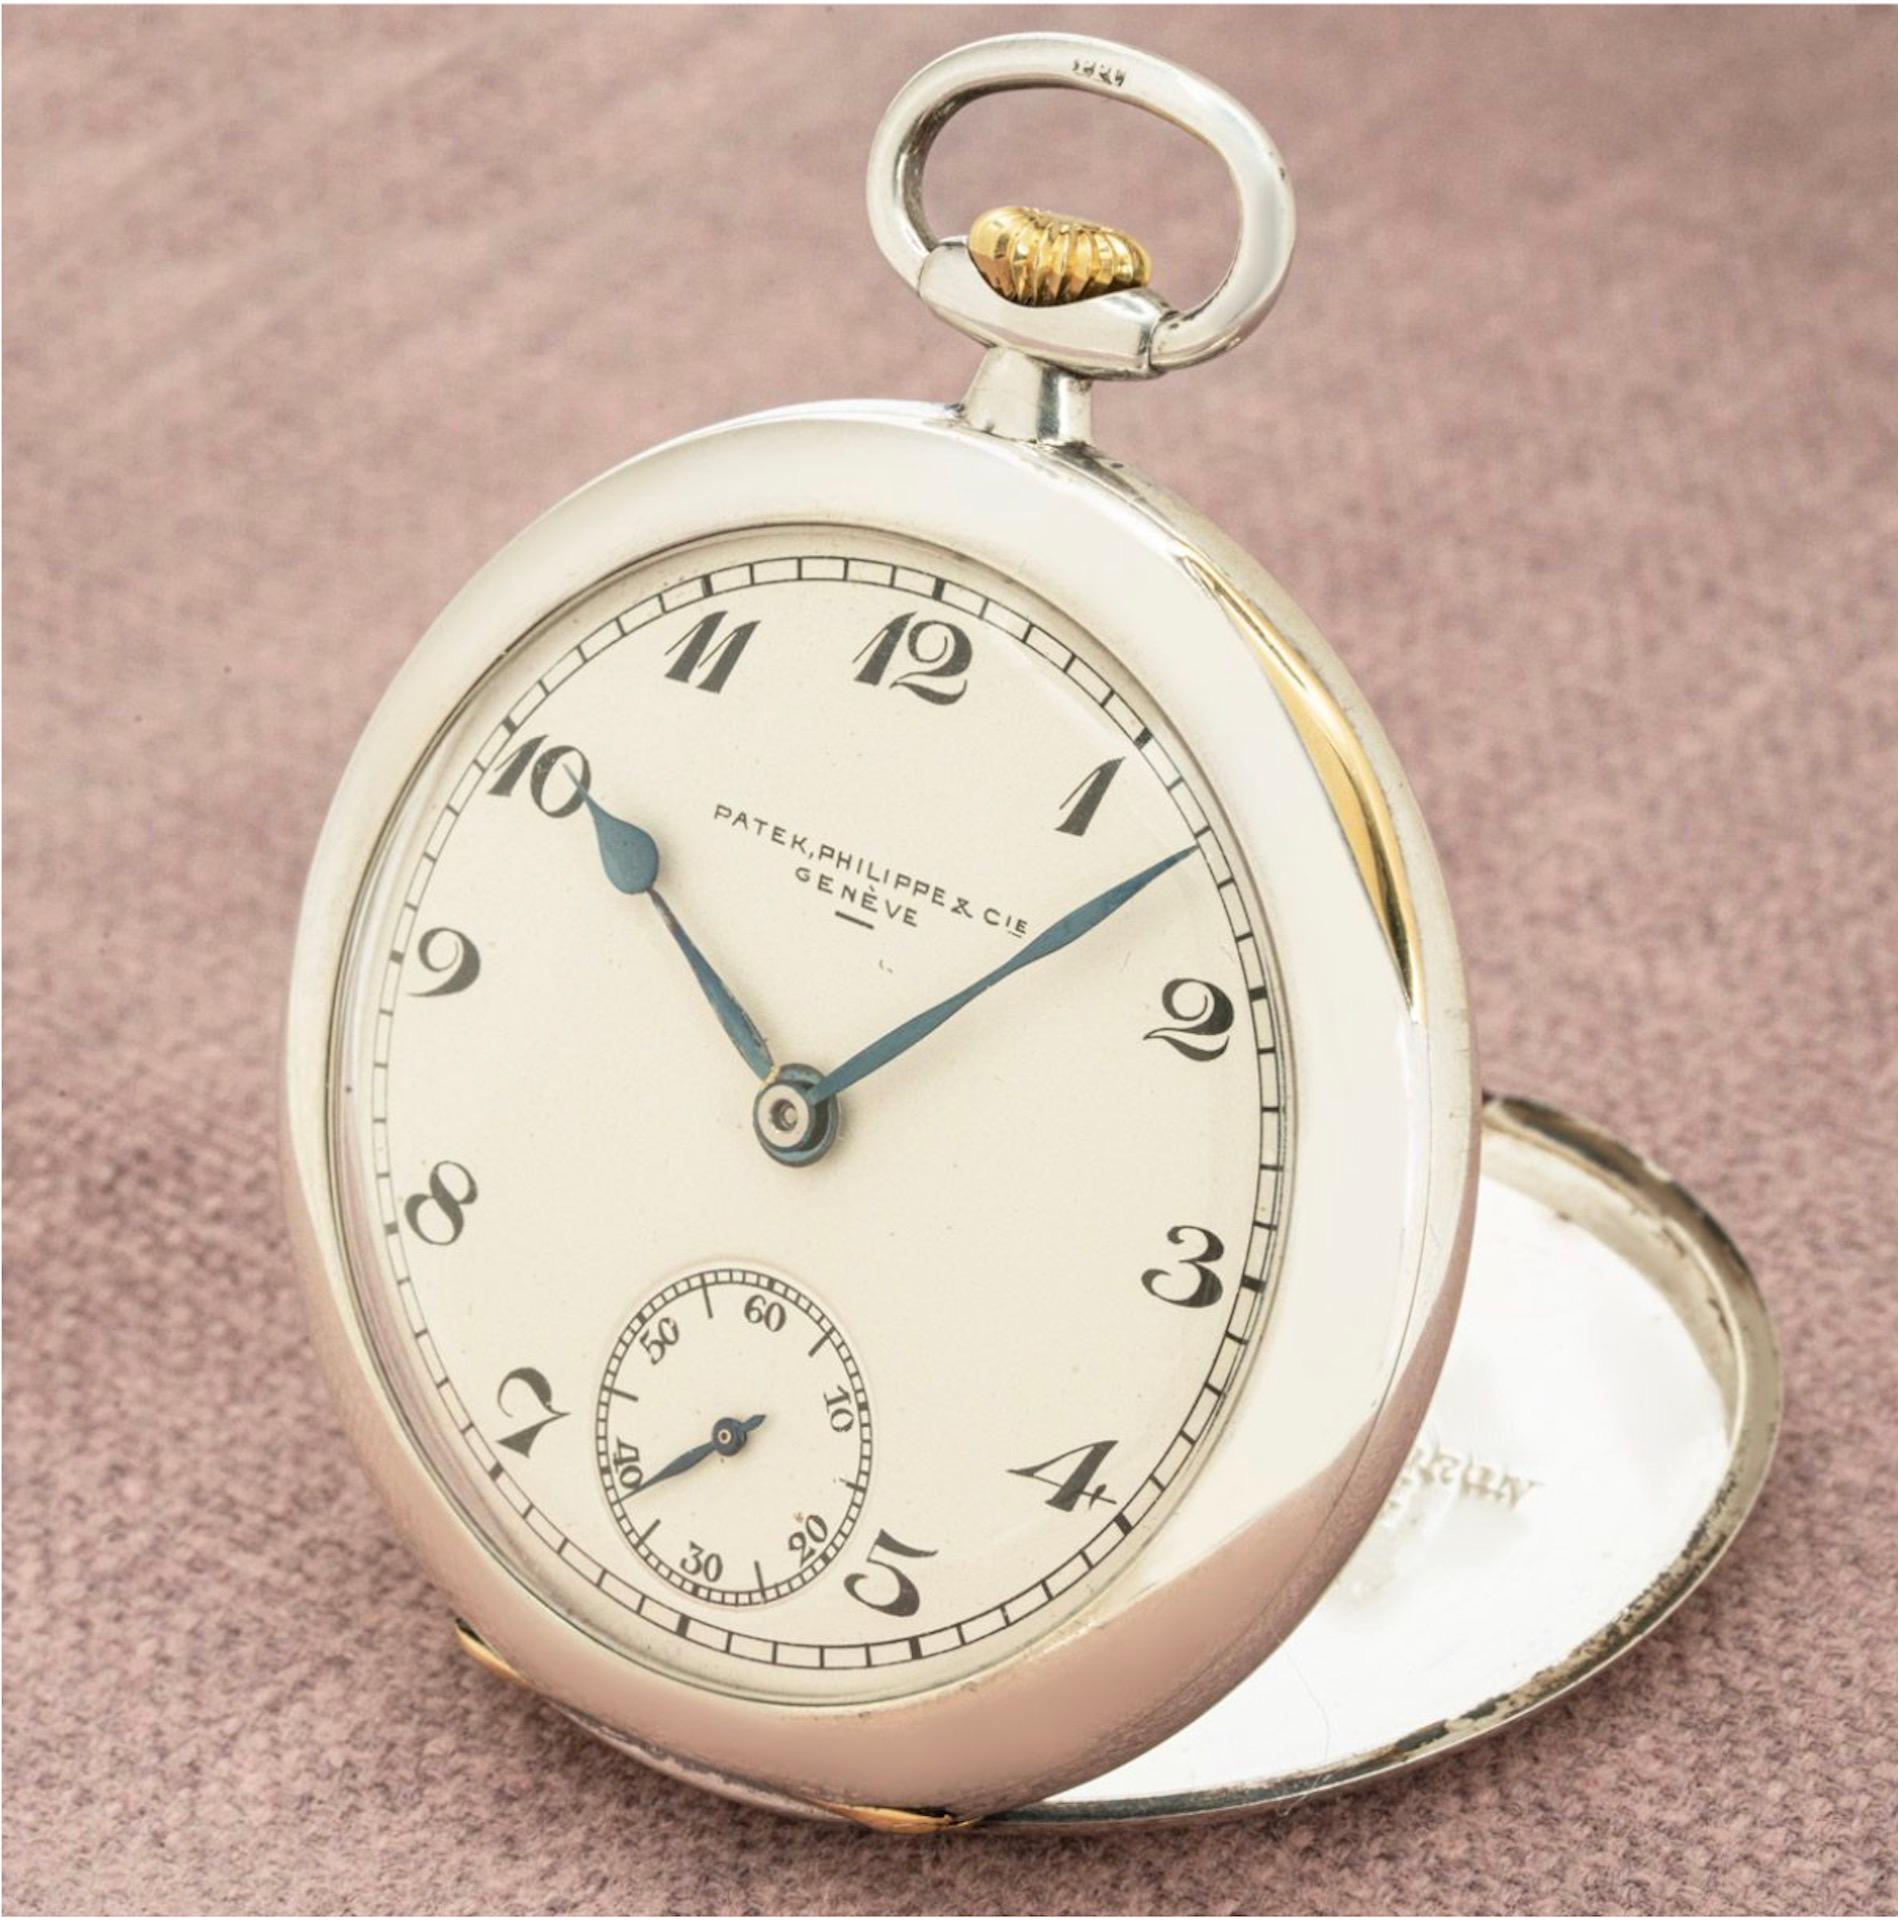 A rare Patek Philippe silver and gold, keyless lever open face dress pocket watch, C1920s.

Dial: The beautifully crisp fully signed Patek Philippe & Cie Genève silver dial with black Arabic numerals, outer minute track and subsidiary seconds dial